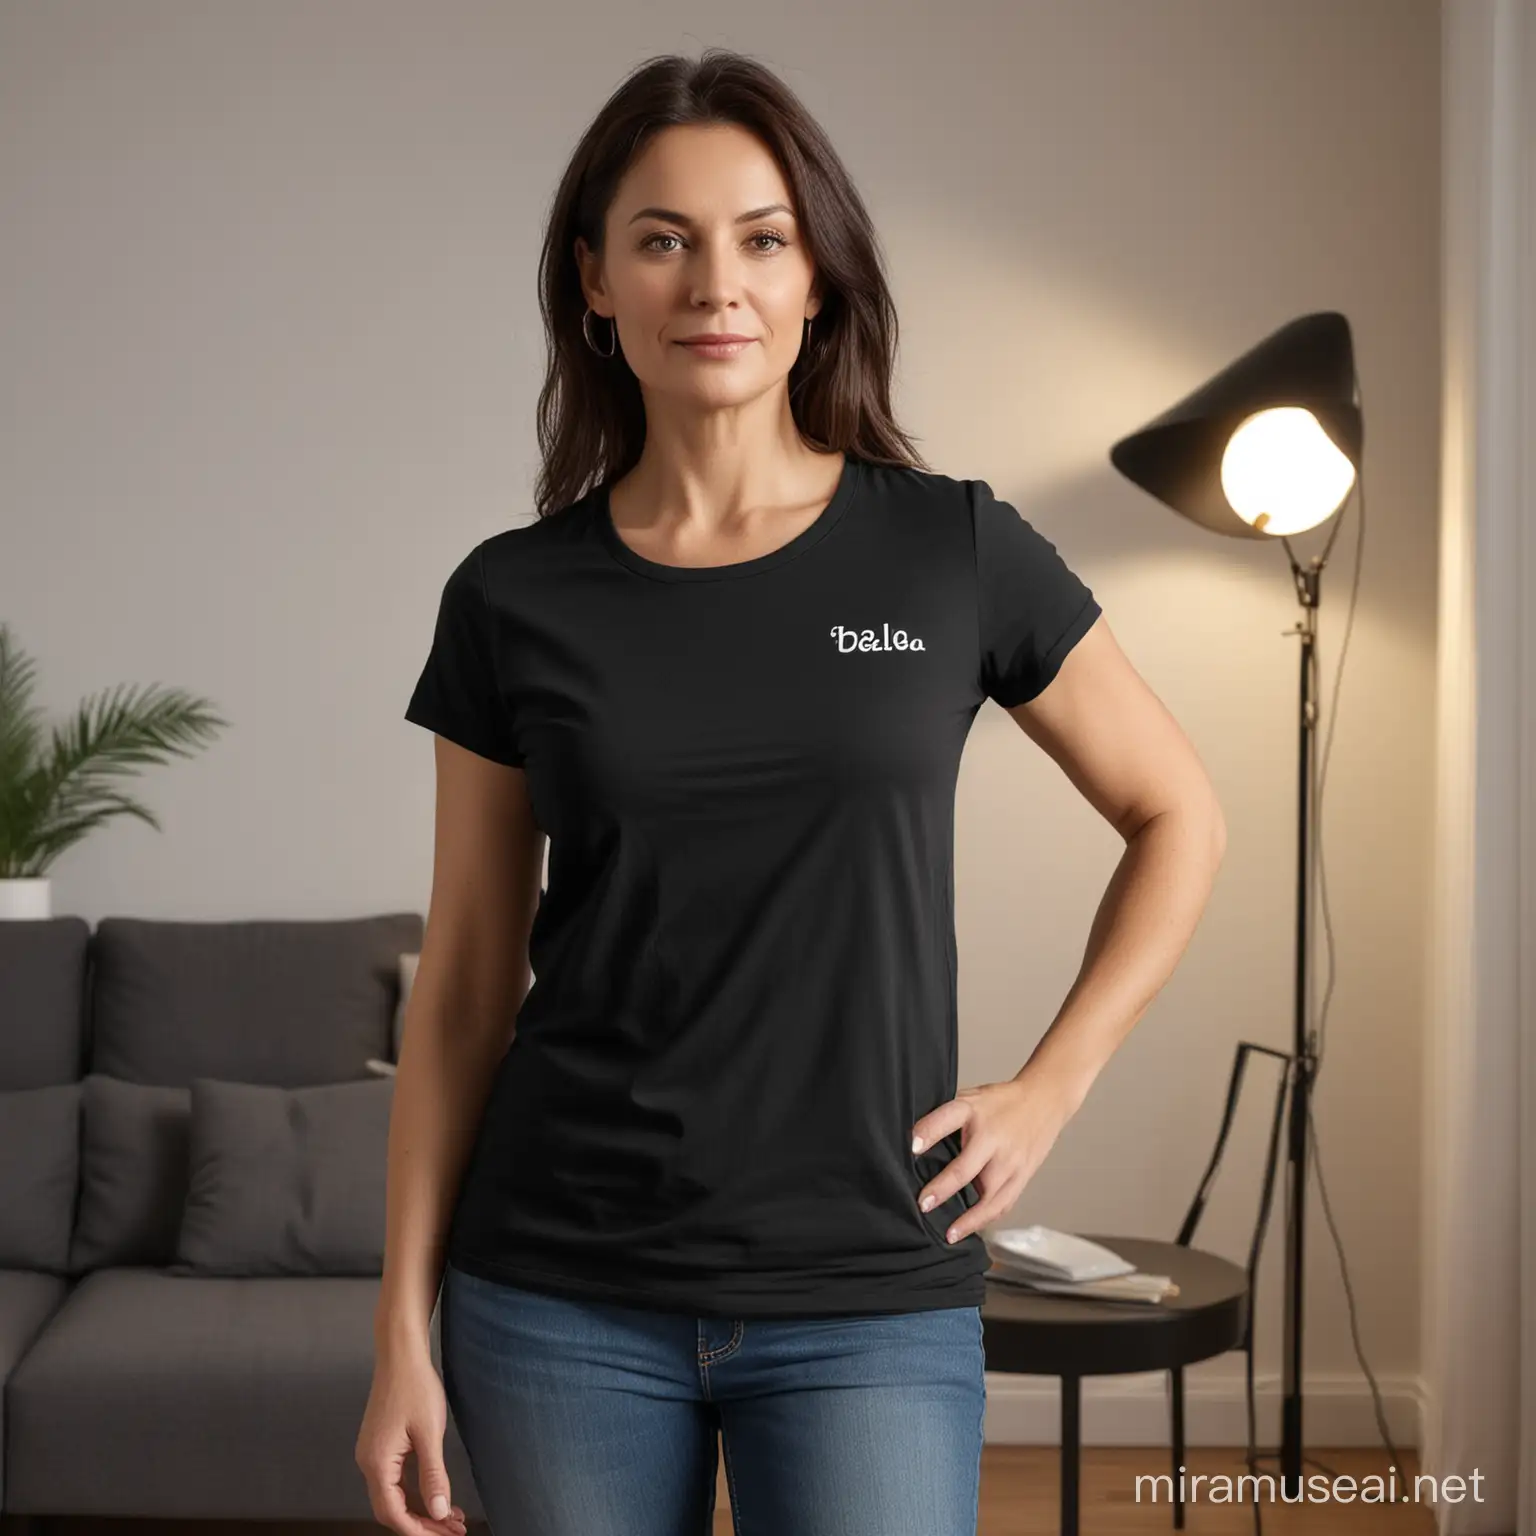 Subject: An middle-aged woman

Setting: Well-lit indoor room with minimal furnishings

Background: Plain black T-shirt

Lighting: Good lighting to enhance visibility and highlight design details

Styling: Tastefully styled presentation of the T-shirt frontage

Action: Showcasing designs on the T-shirt

Items: Bella 3000 mock-up photo featuring a plain black t-shirt

Costume or Appearance: Elegant attire suitable for an woman